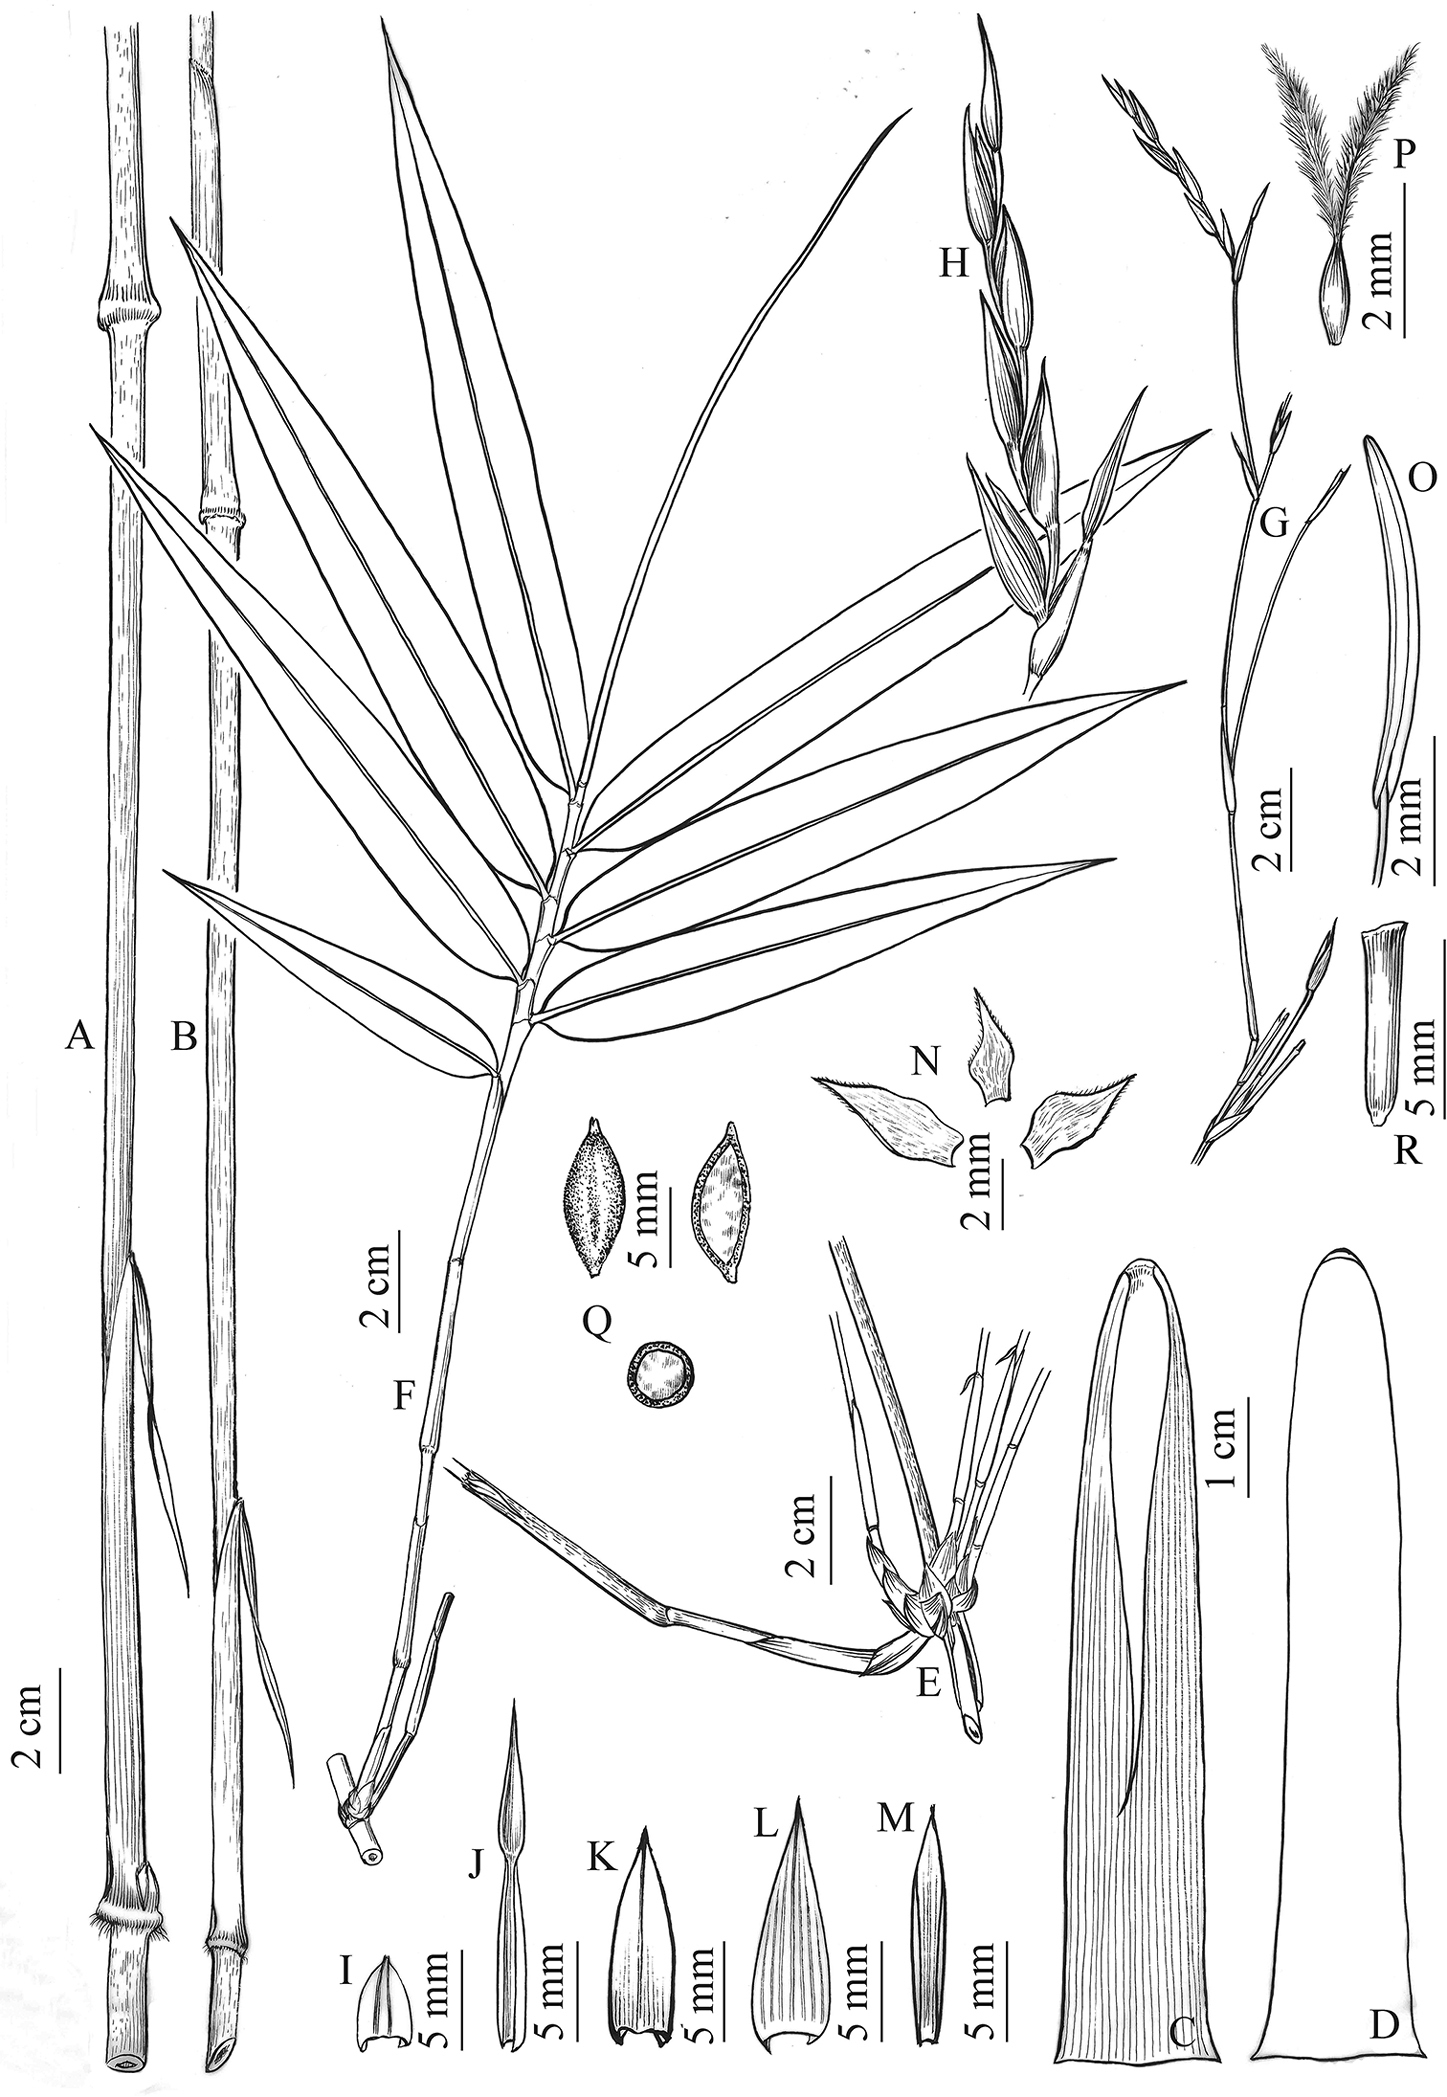 Khoonmengia honbaensis, a new genus and species of temperate bamboo ...